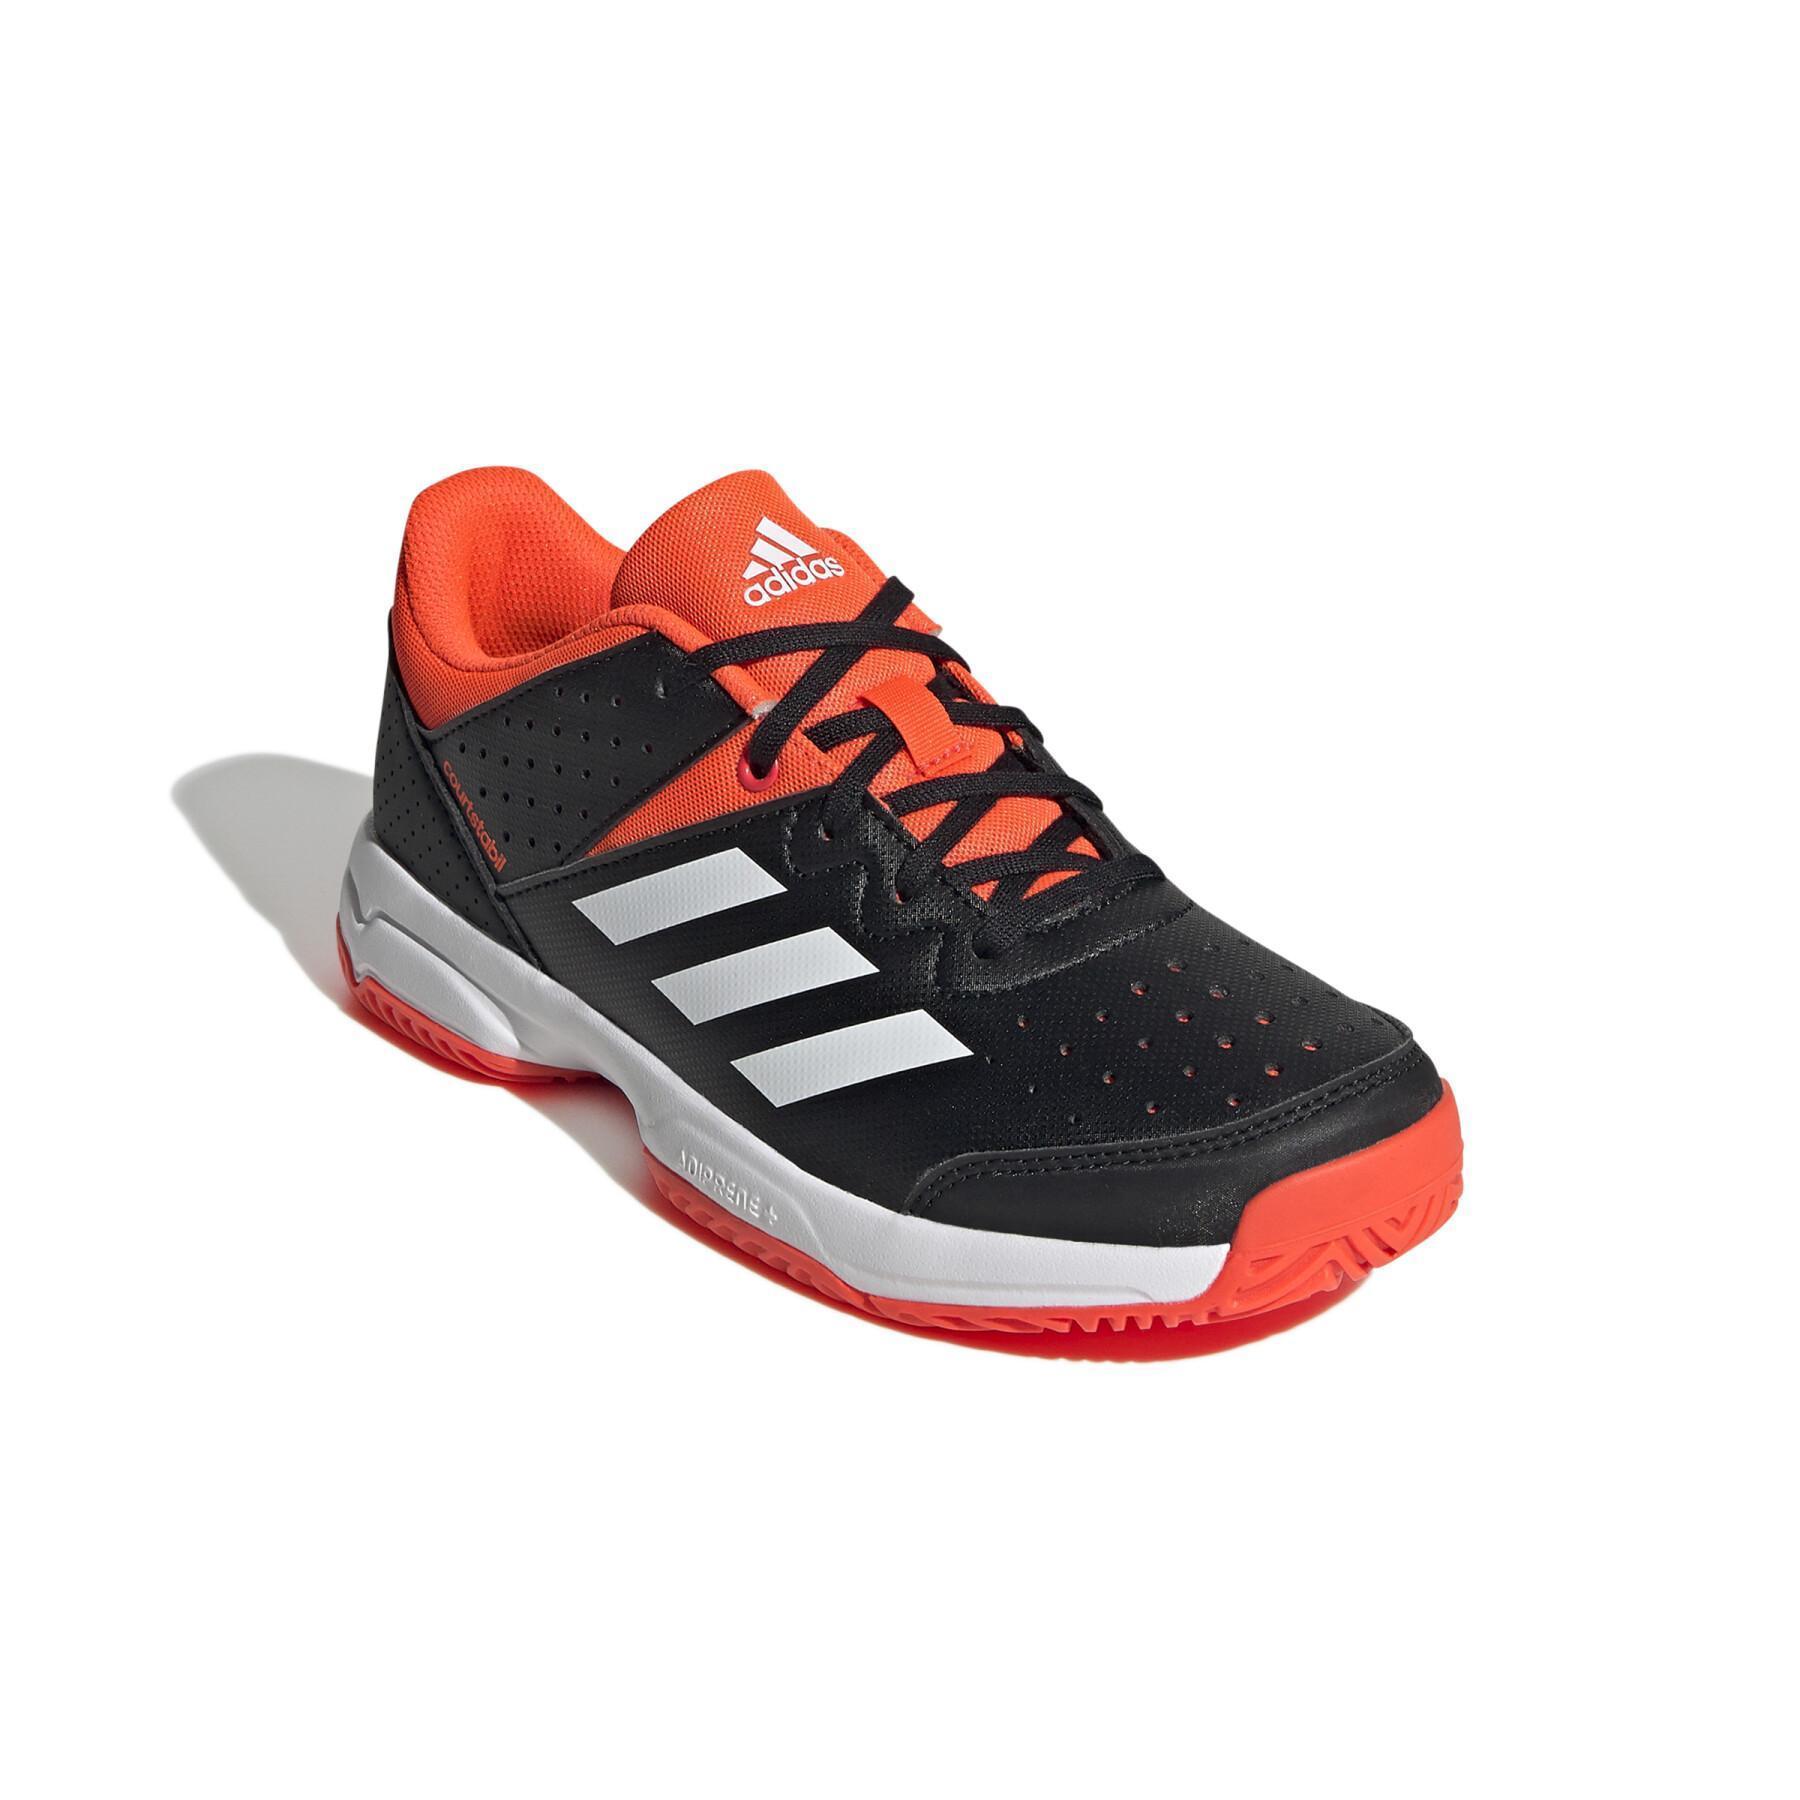 Chaussures enfant Adidas Court Stabil